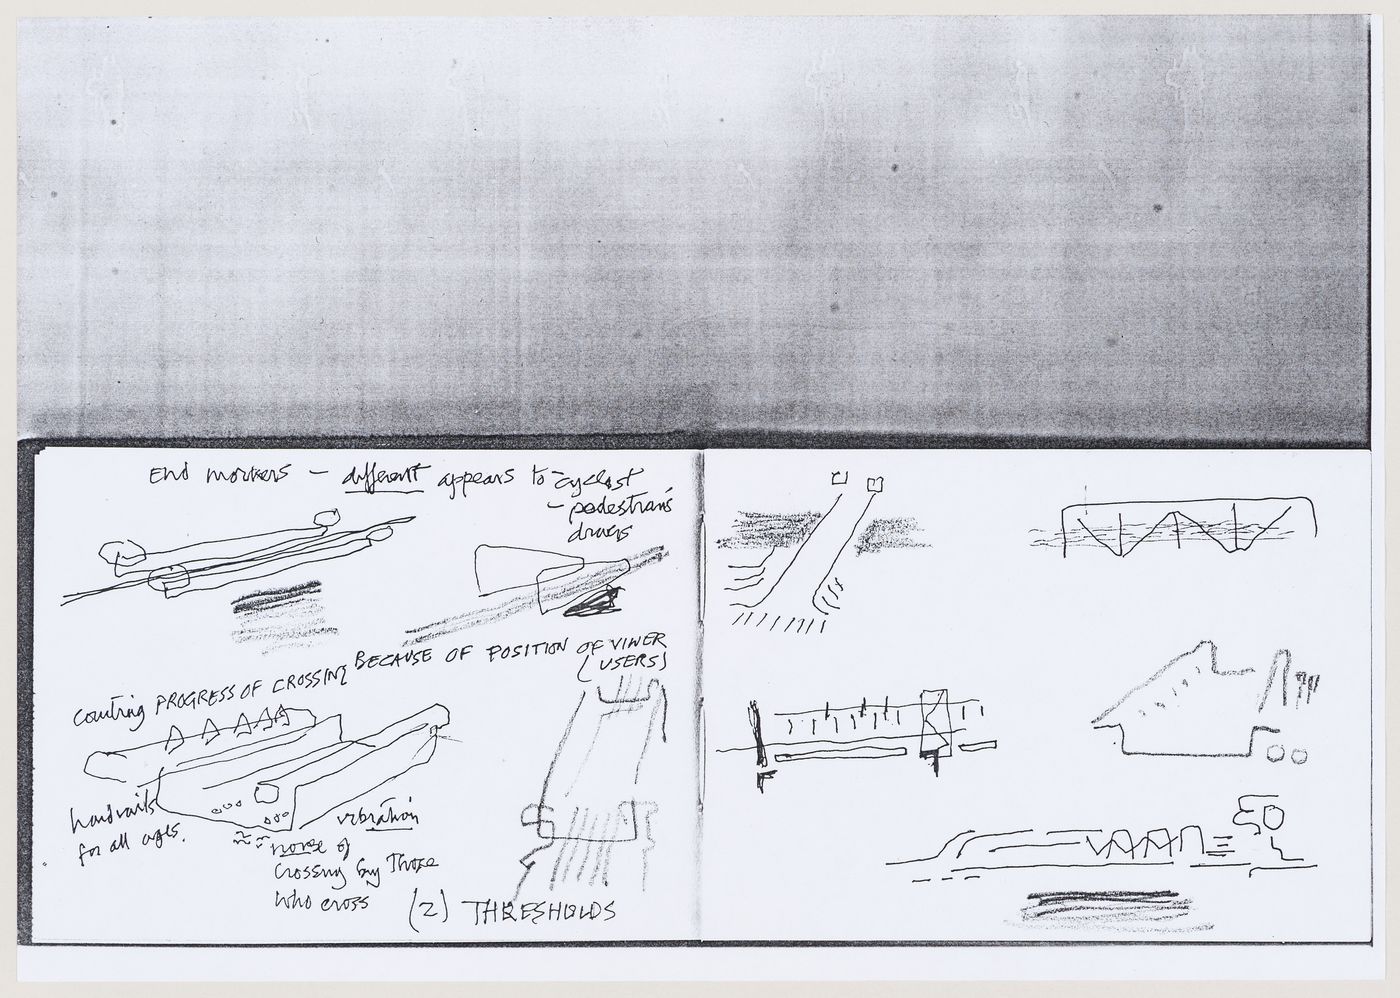 Bridges@leidschenveen.nl (Competition), 1997-1998, entry by Cedric Price: conceptual sketches, some with notes